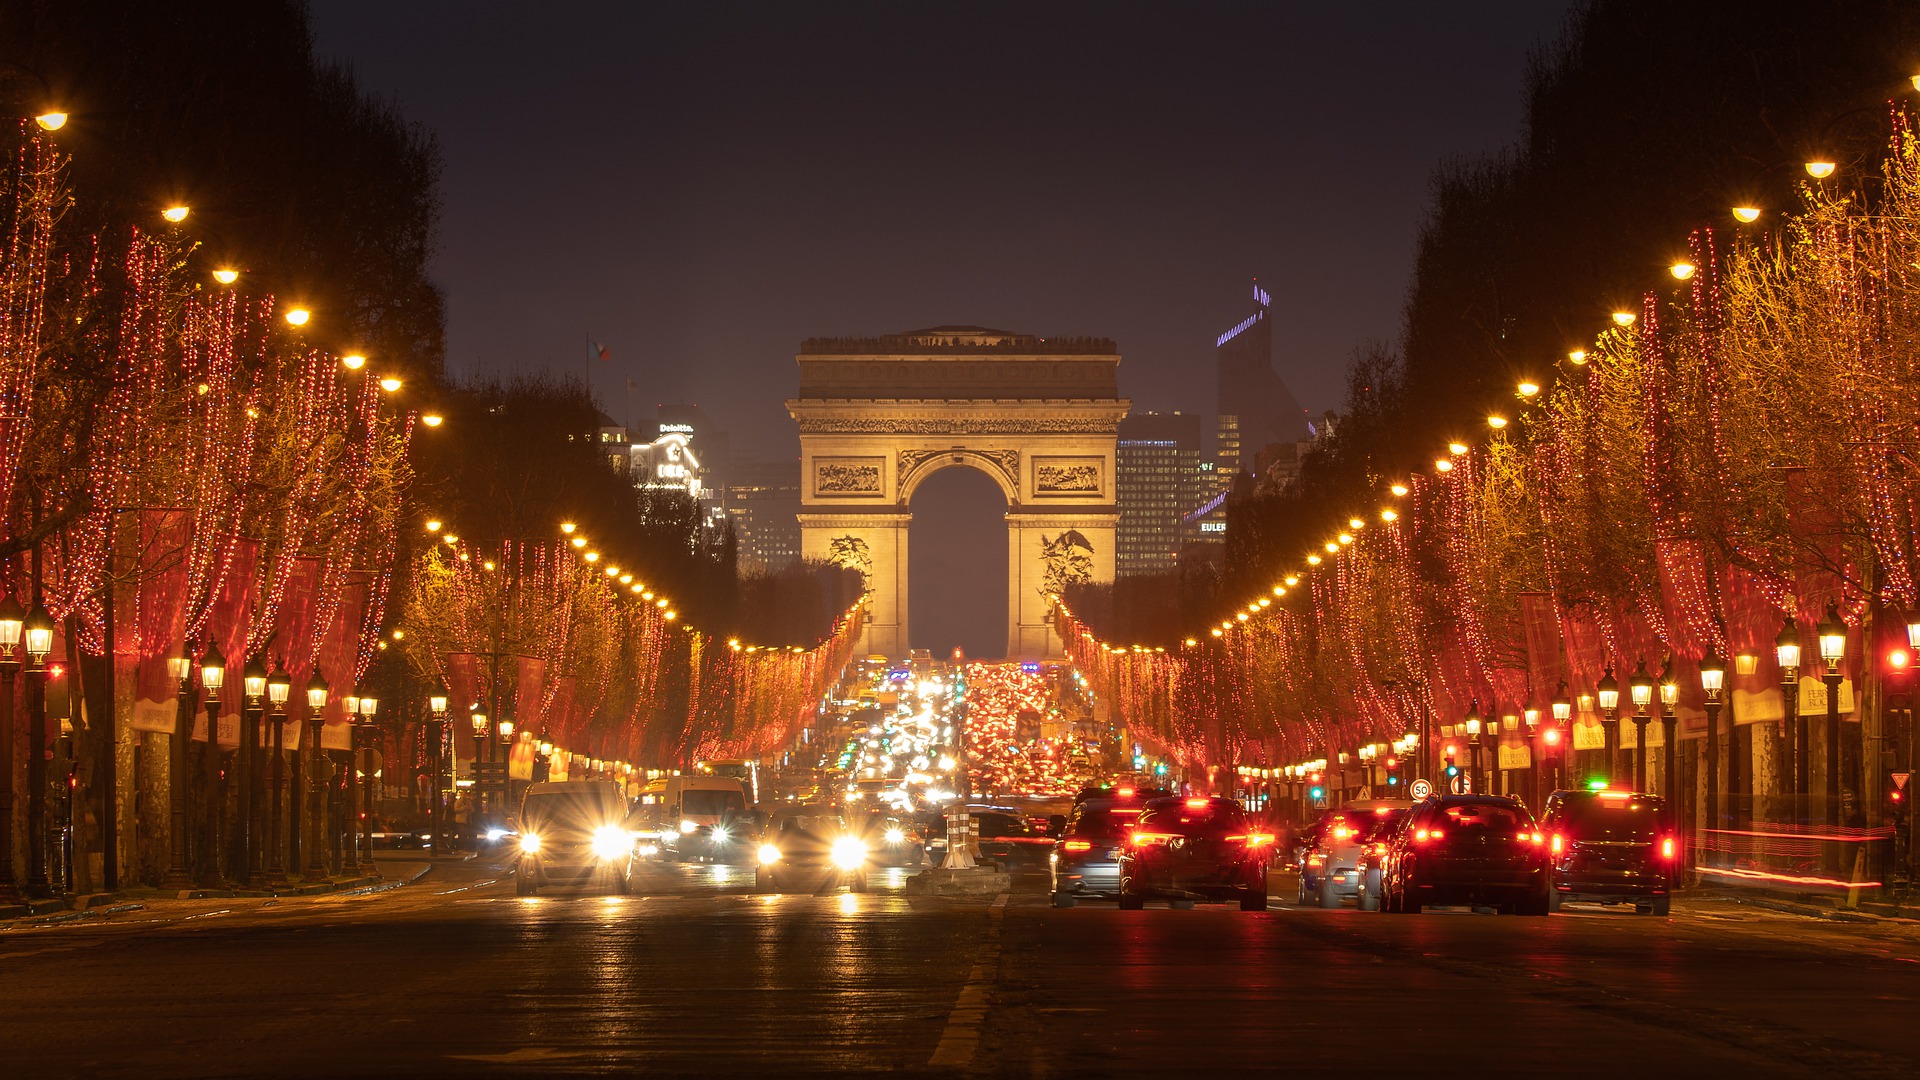 Champs Elysees symbolic setting for largest Louis Vuitton store in the  world